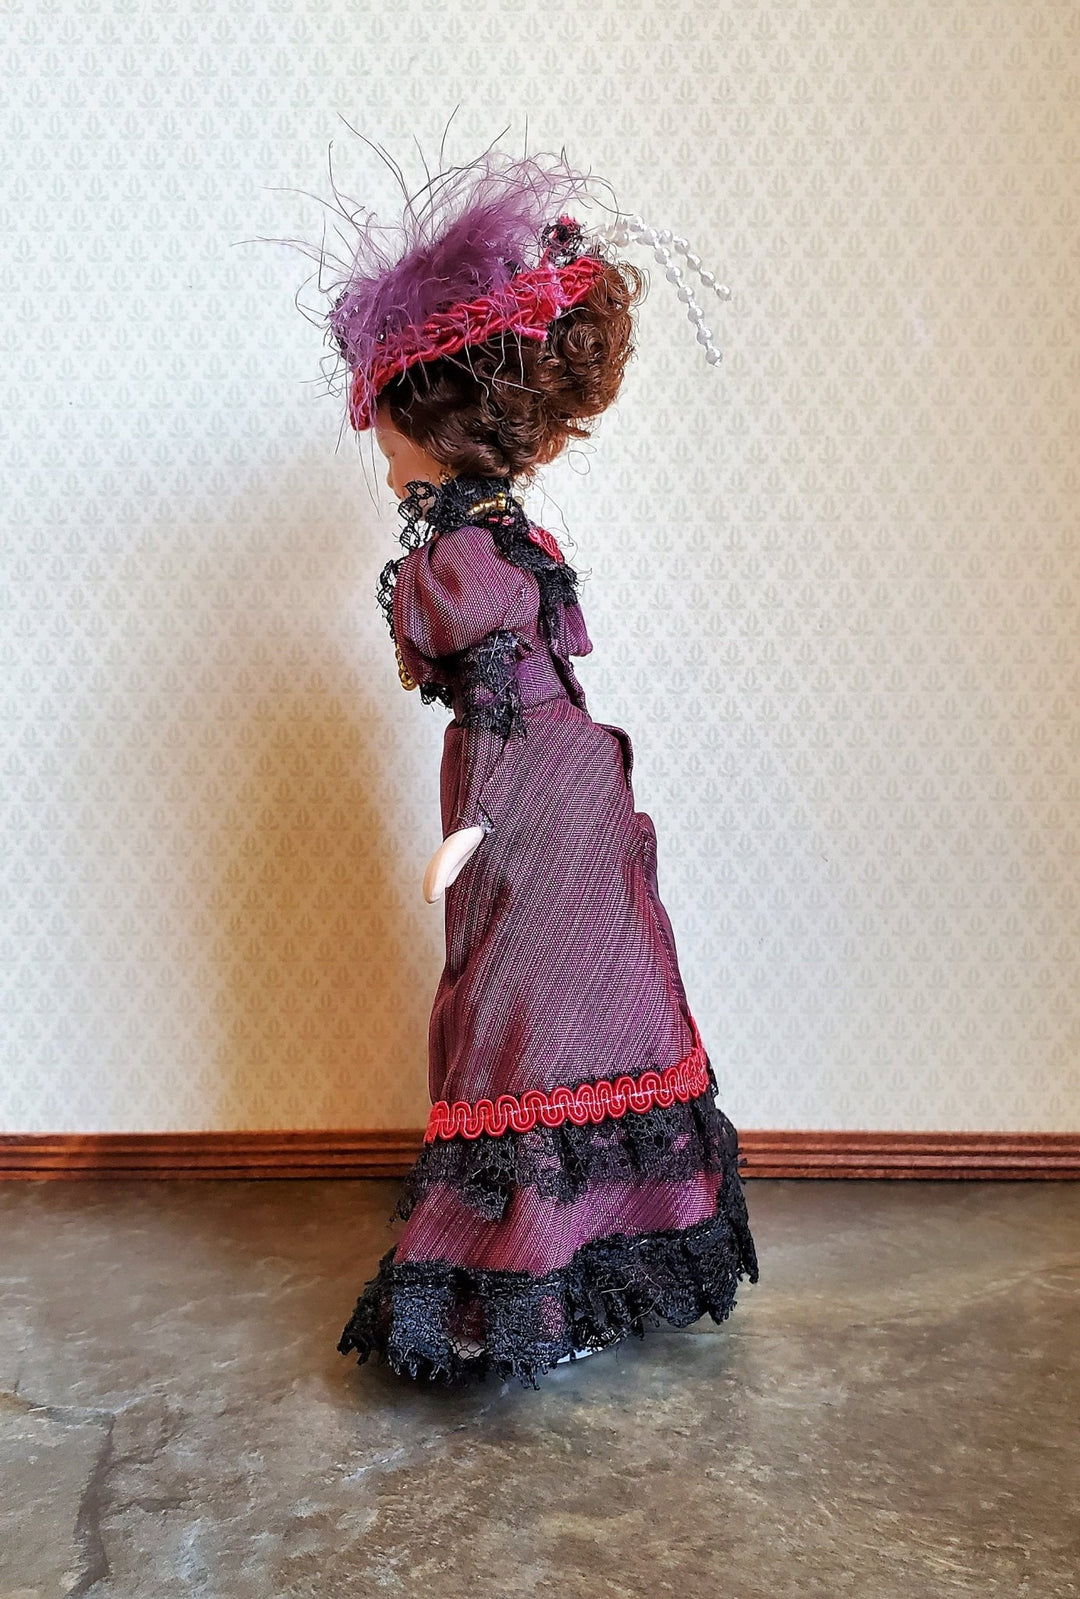 Dollhouse Miniature Victorian Doll Porcelain Fancy Maroon Dress and Hat 1:12 Scale - Miniature Crush